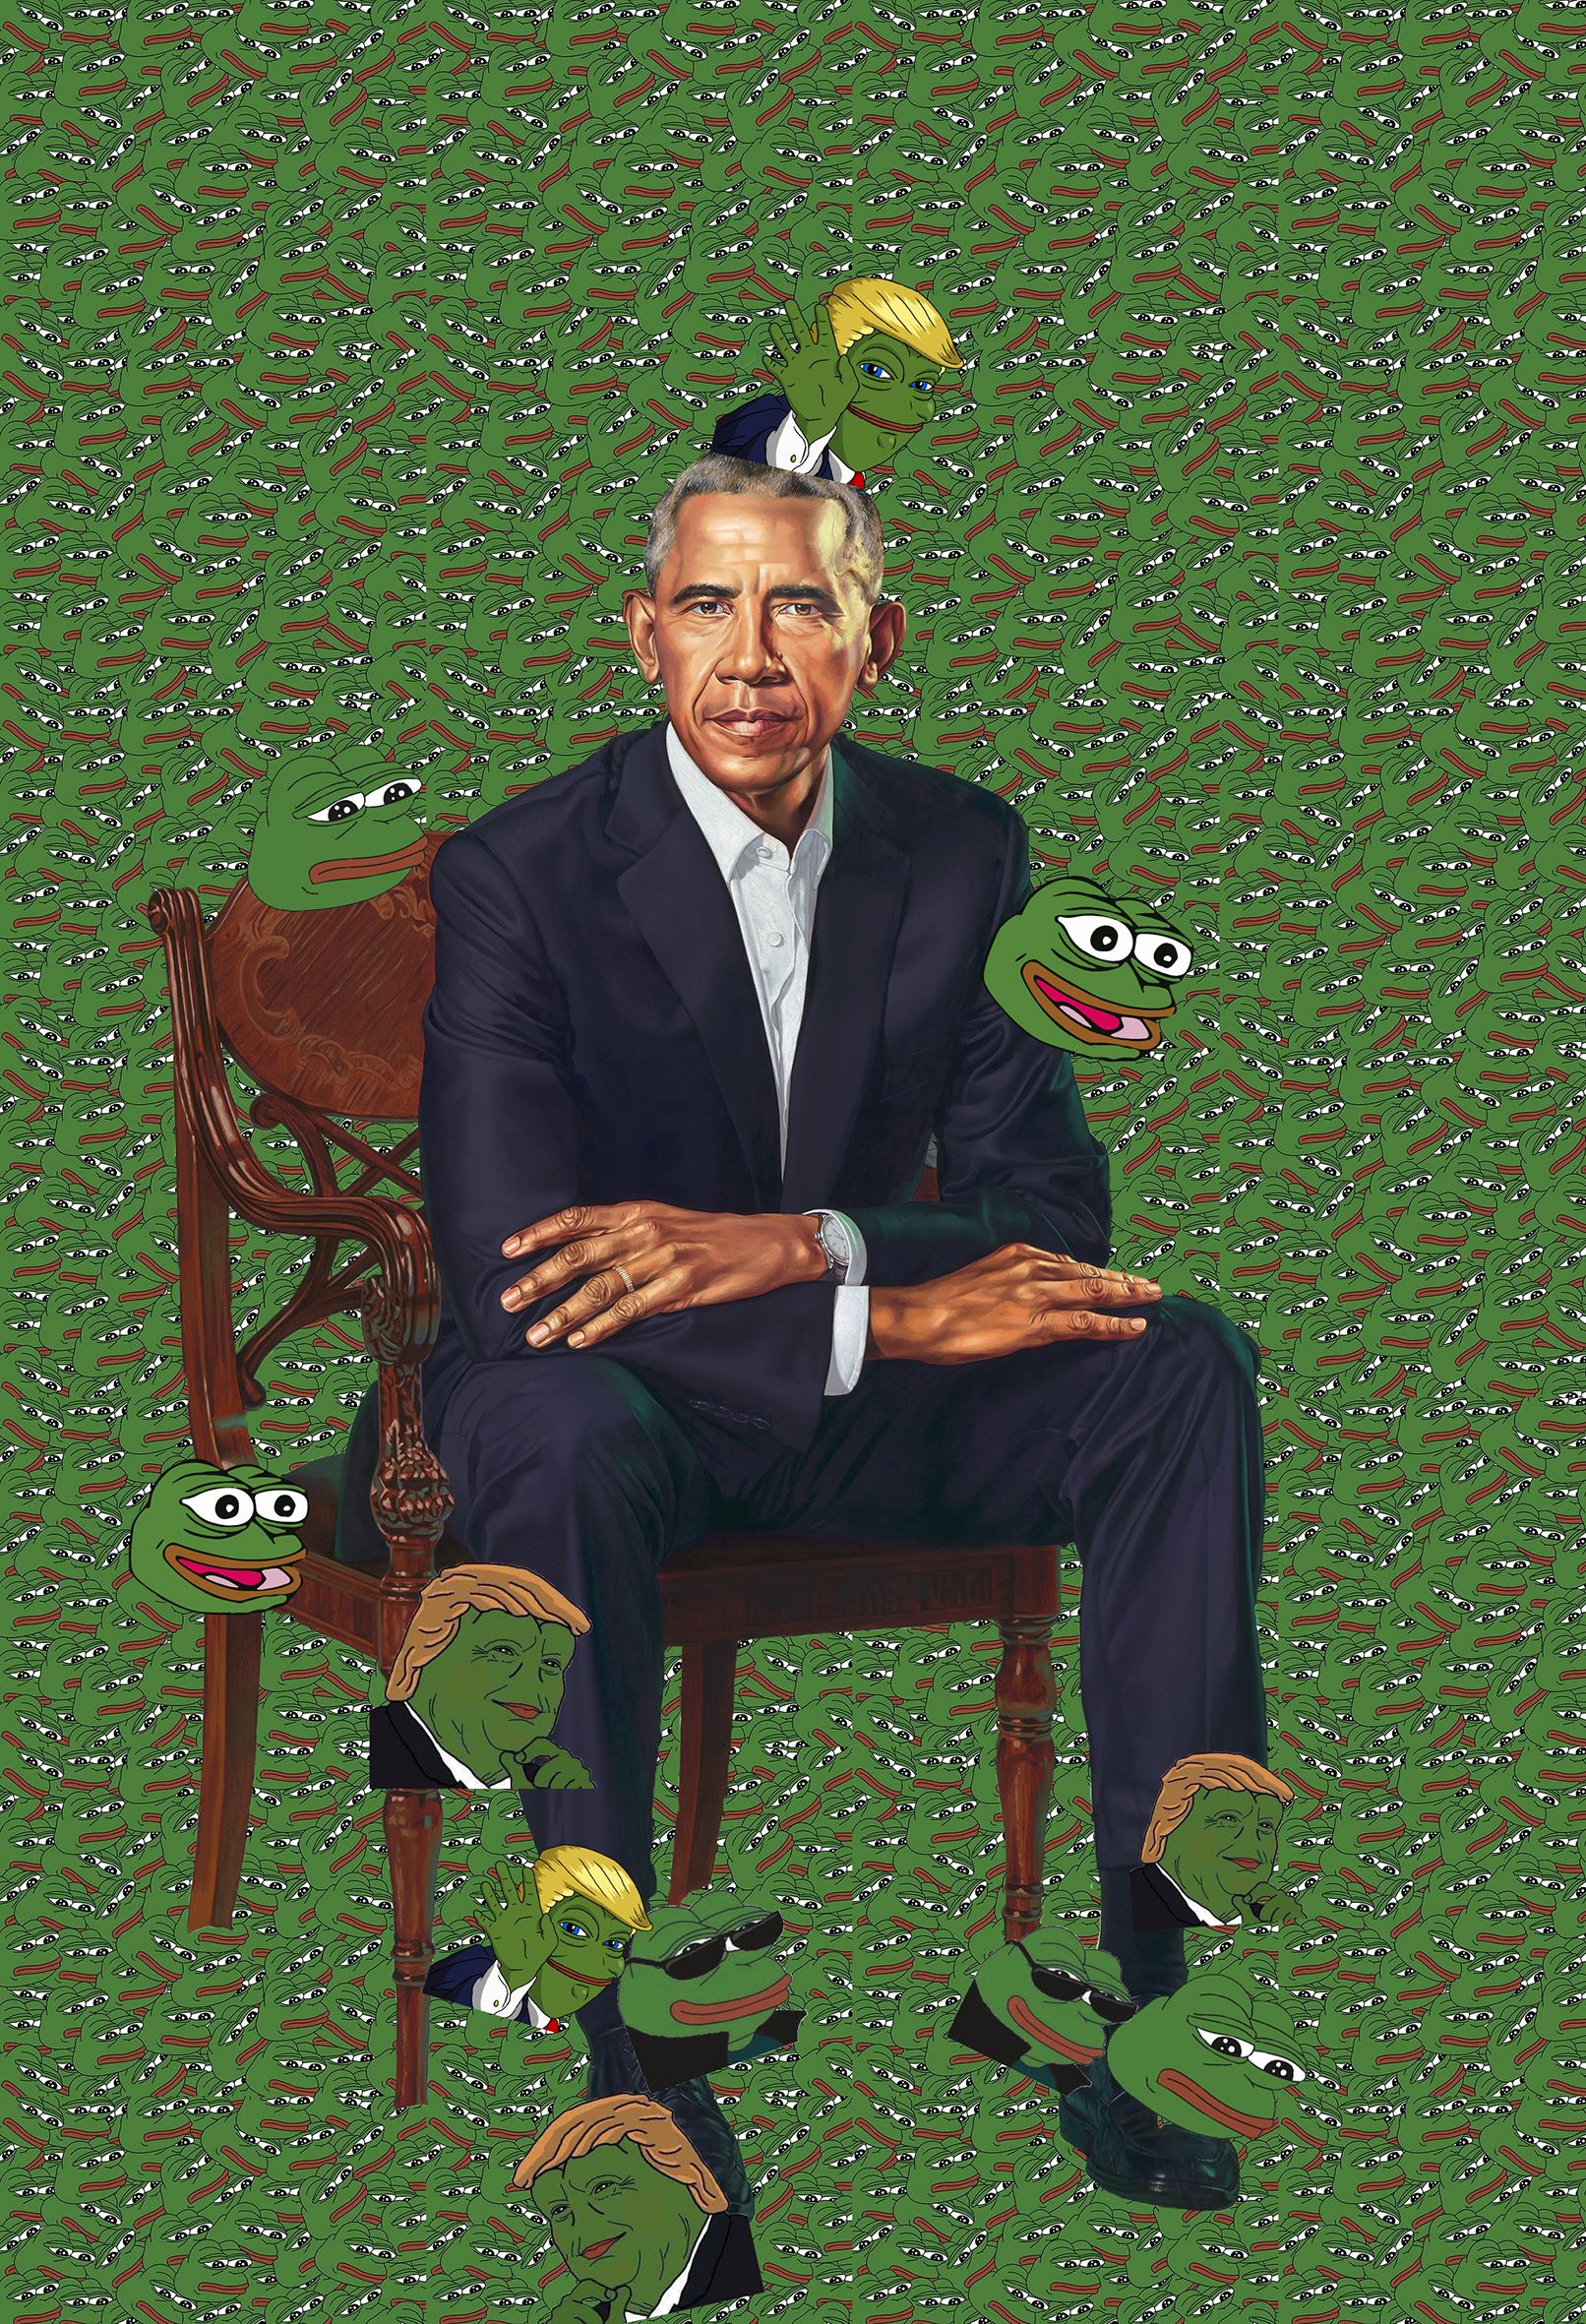 really like the new obama painting